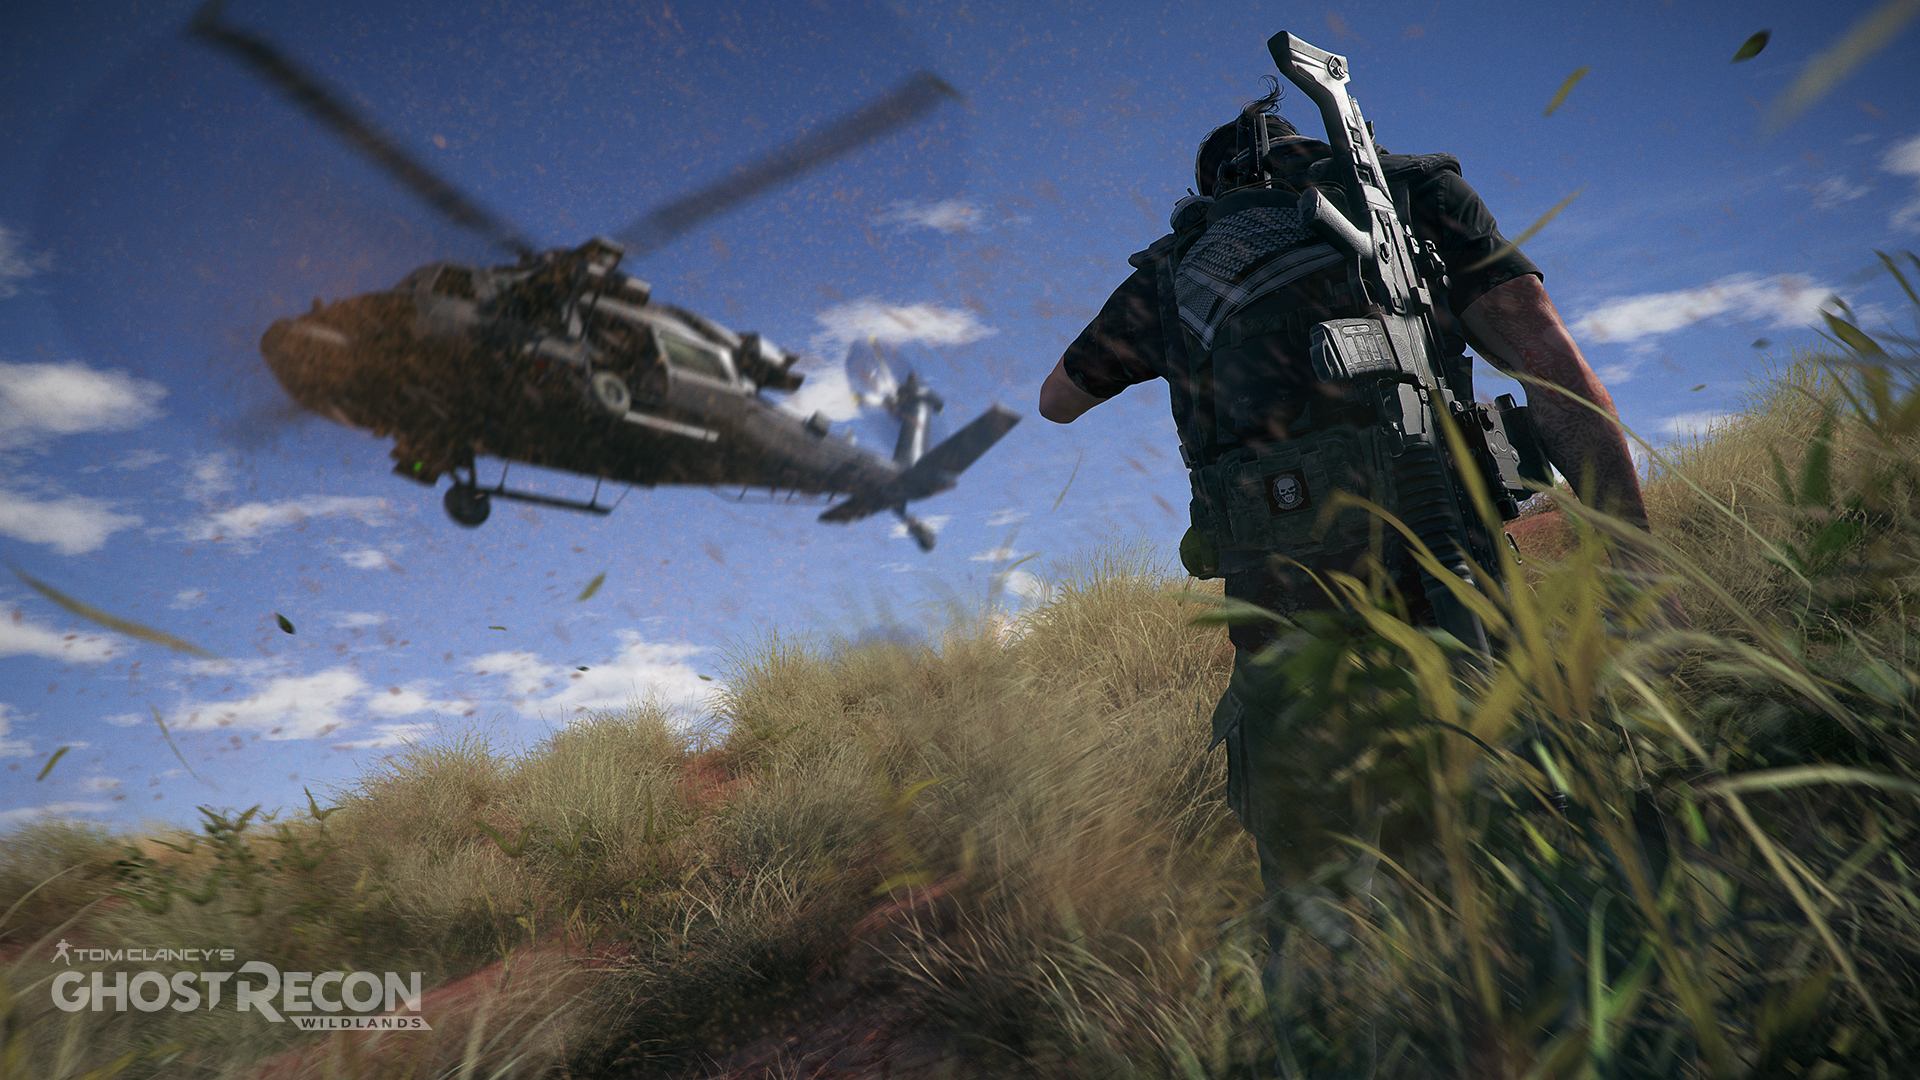 Some more helicopter artwork from Ghost Recon Wildlands